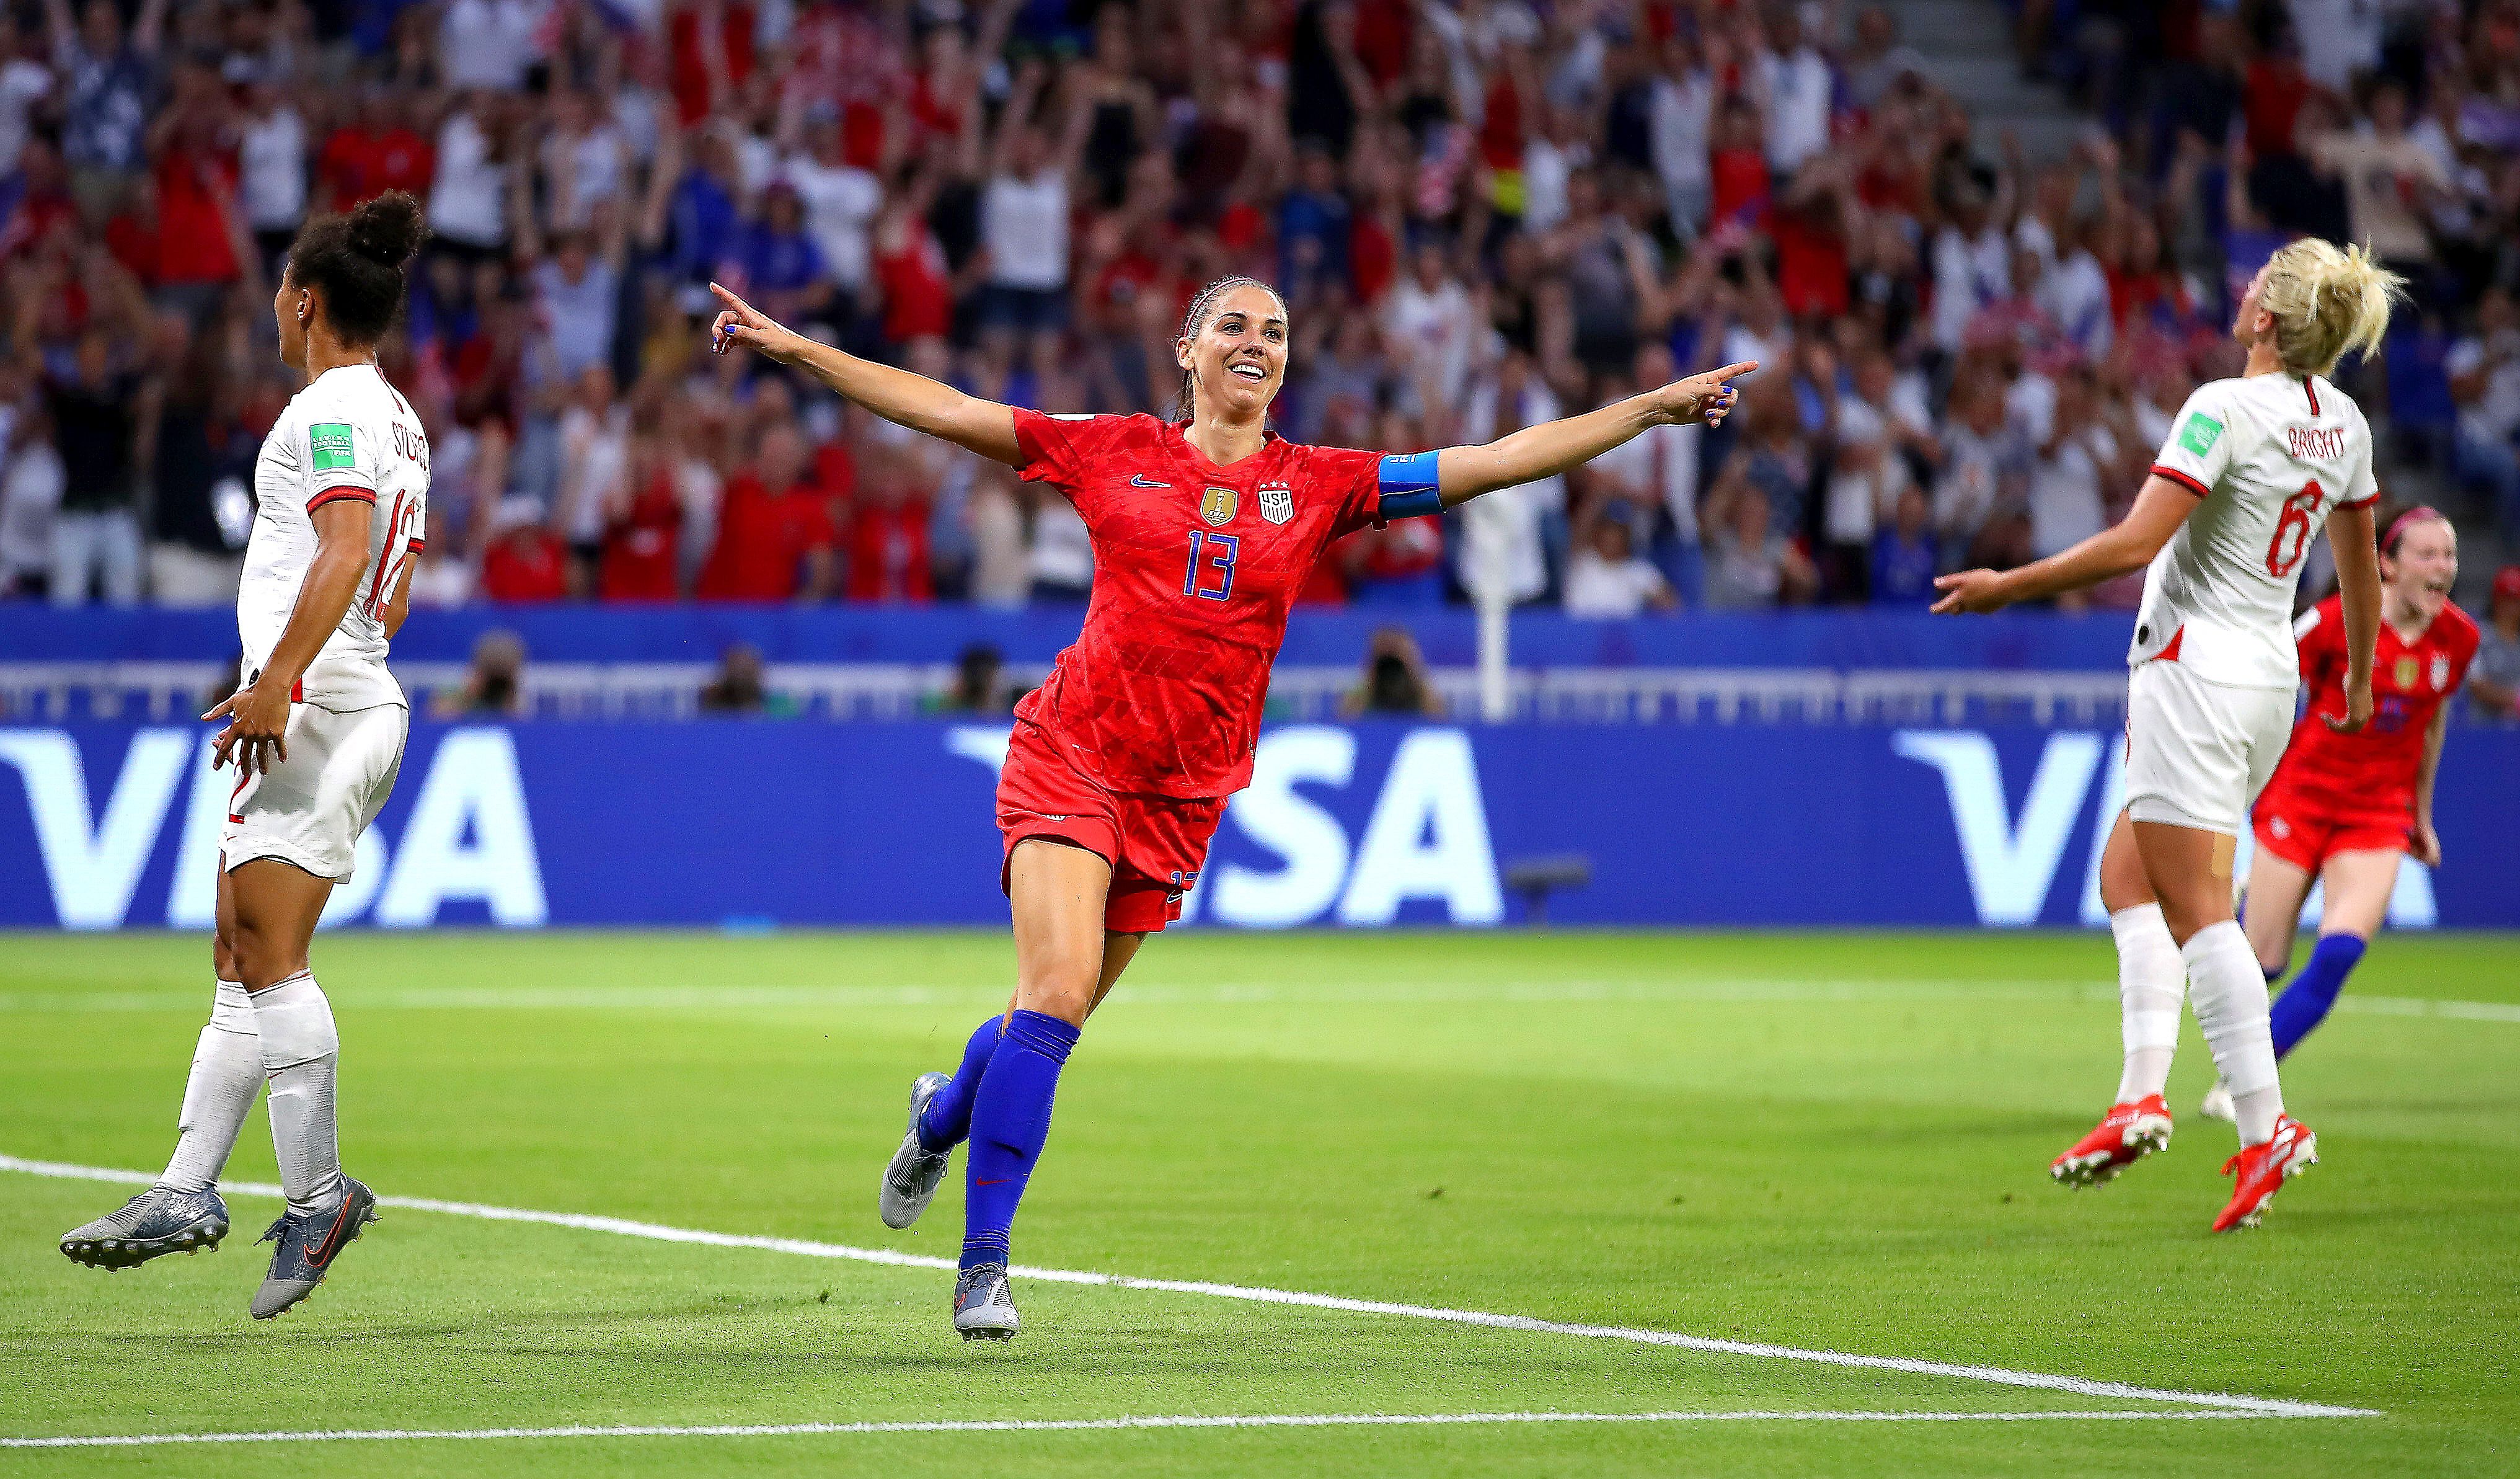 Alex Morgan scores against England in the Women's World Cup semi-final